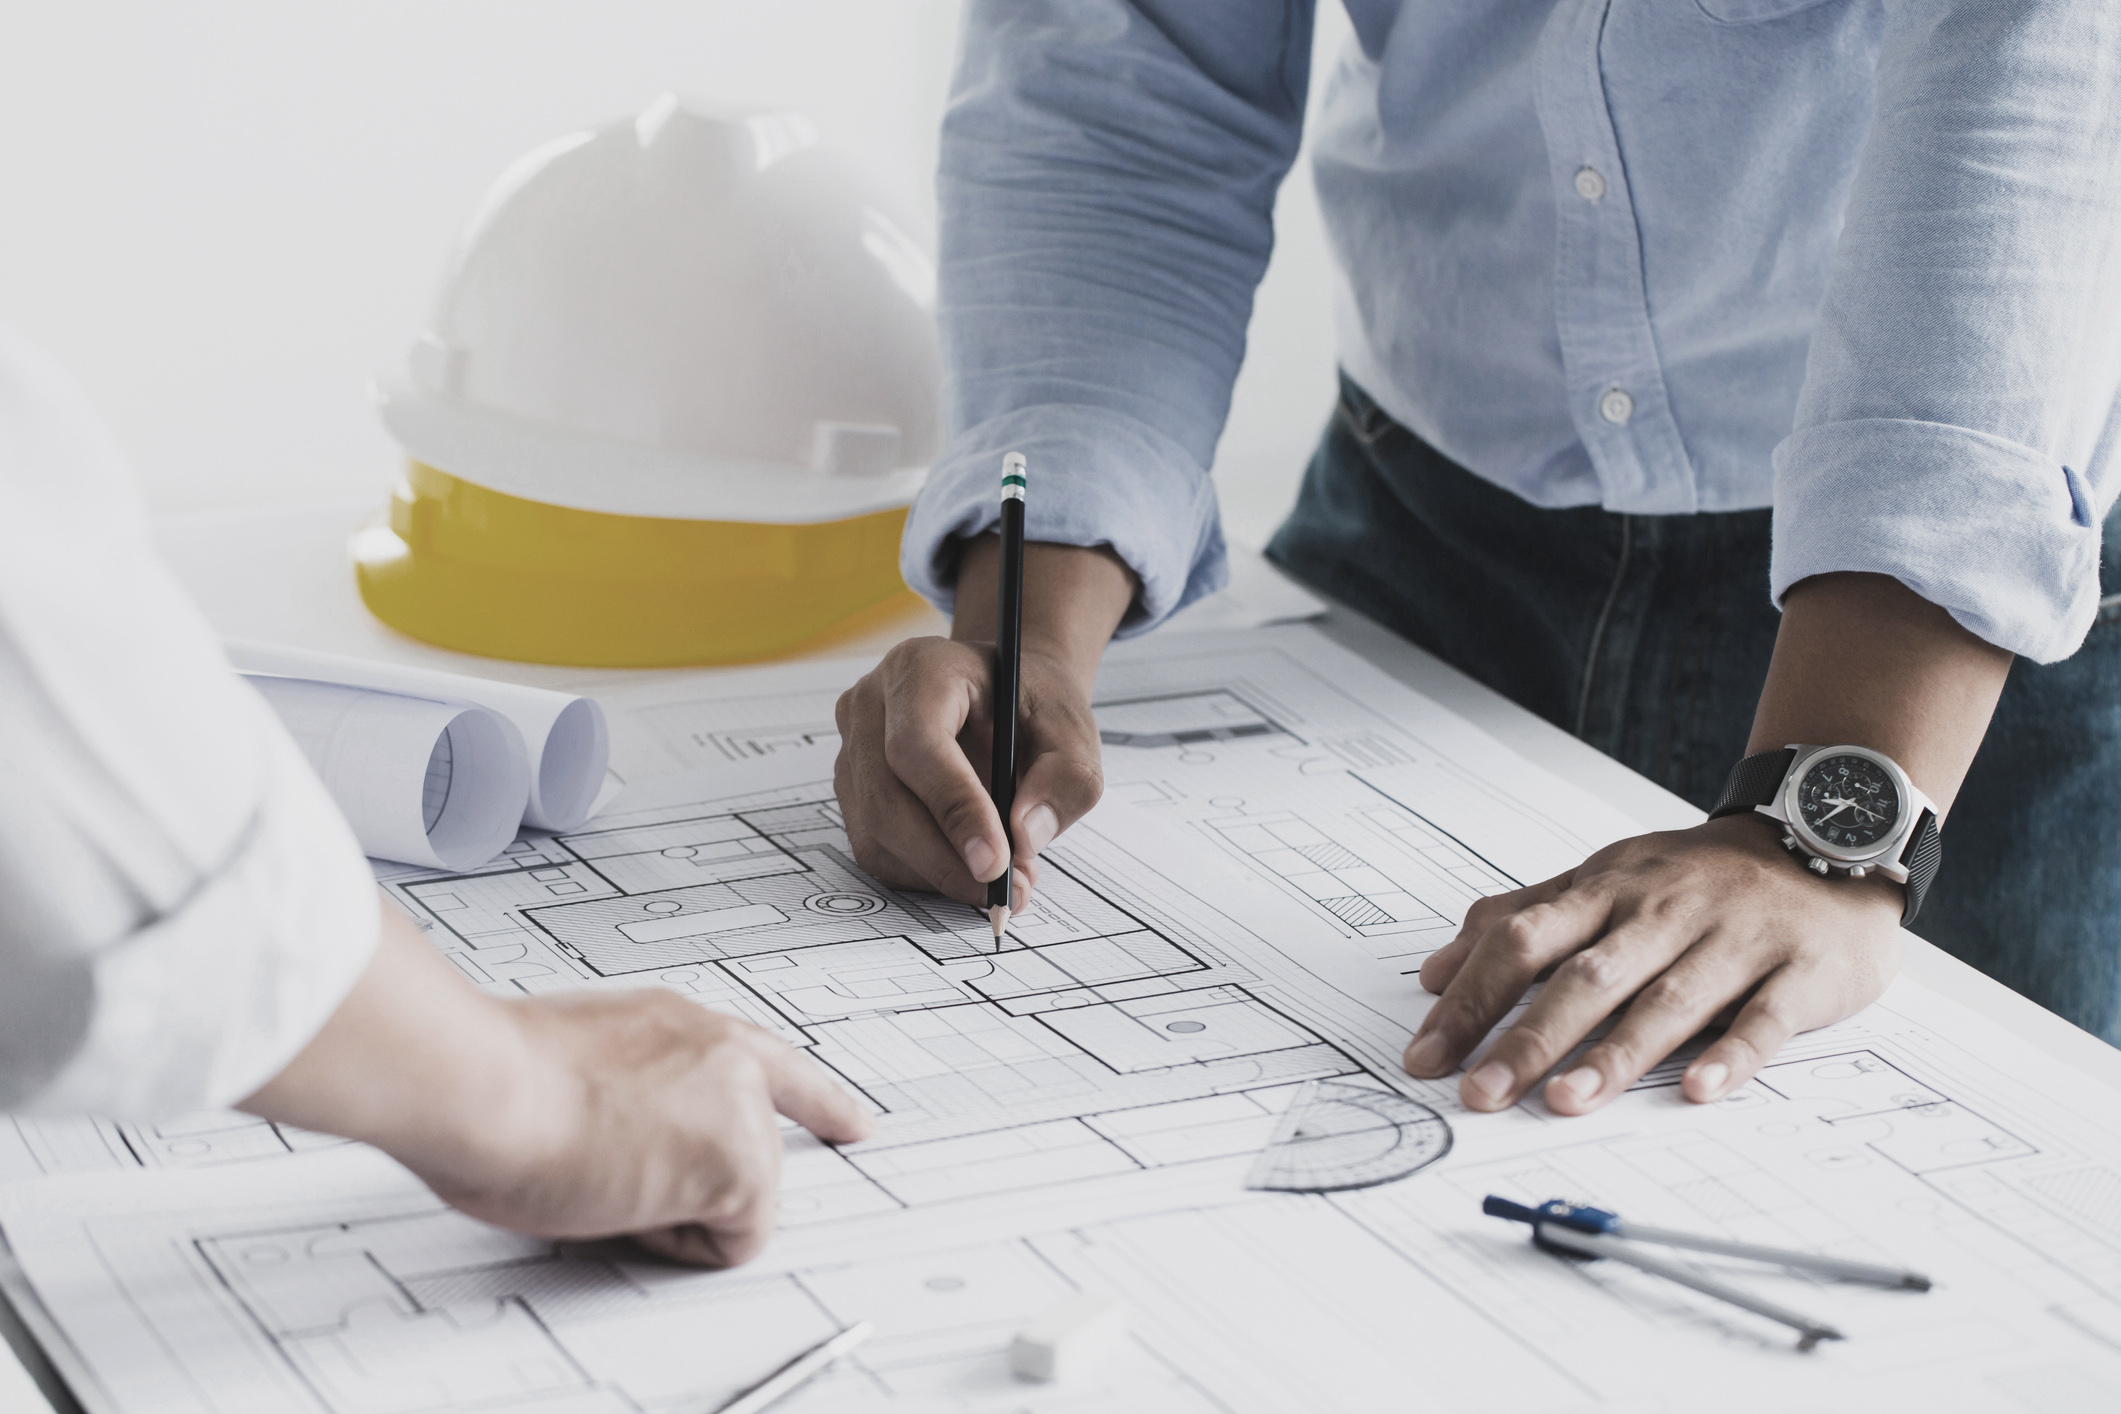 engineer-meeting-for-an-architectural-project-working-with-partner-and-engineering-tools-working-on-blueprint-architectural-project-at-the-construction-site-at-desk-in-the-office